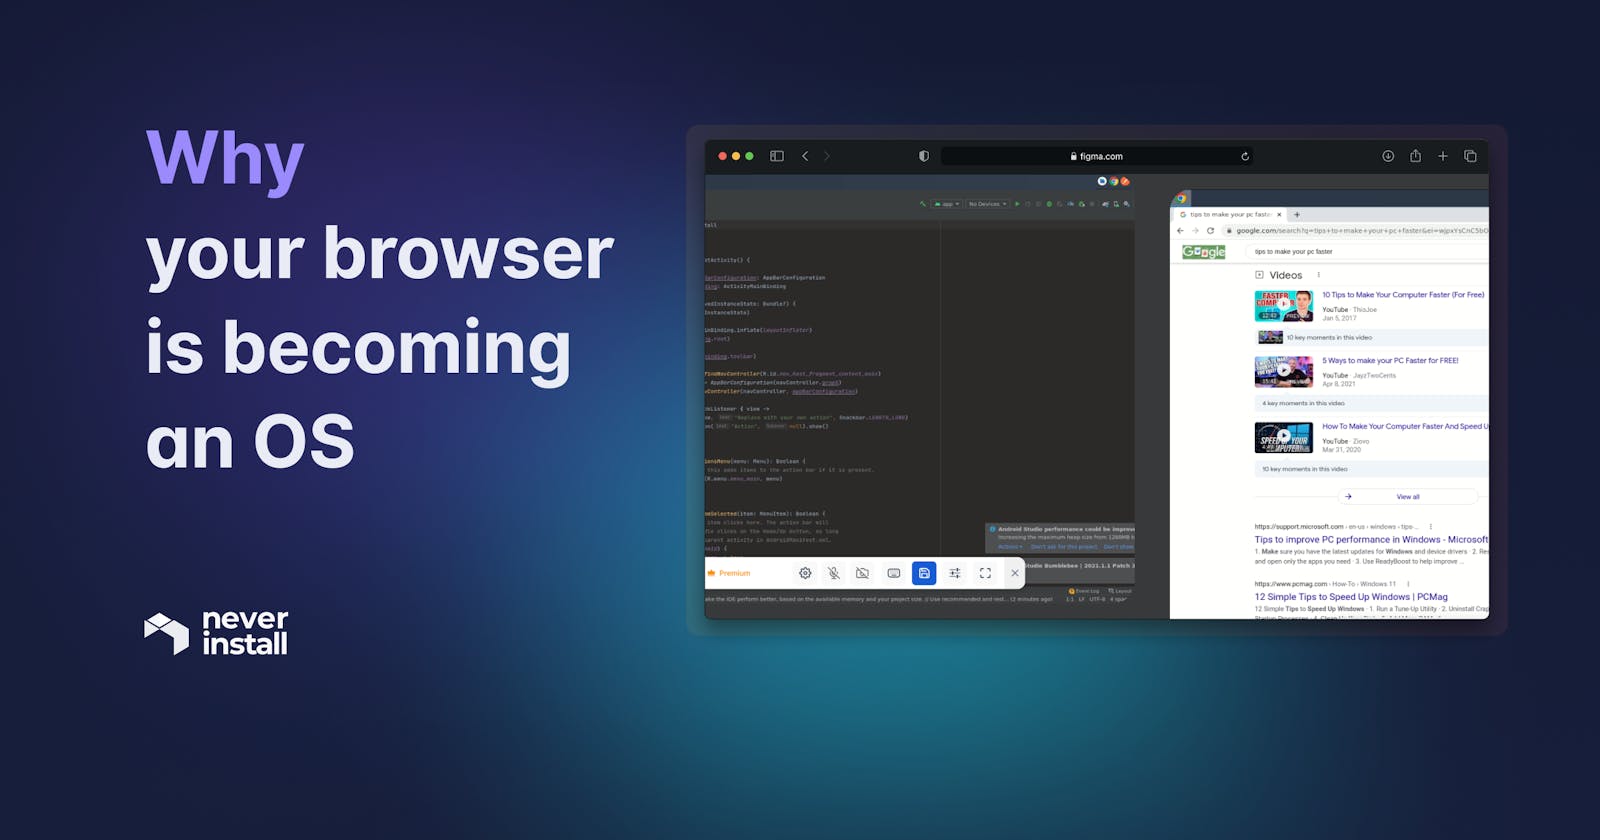 Why your browser is becoming an OS